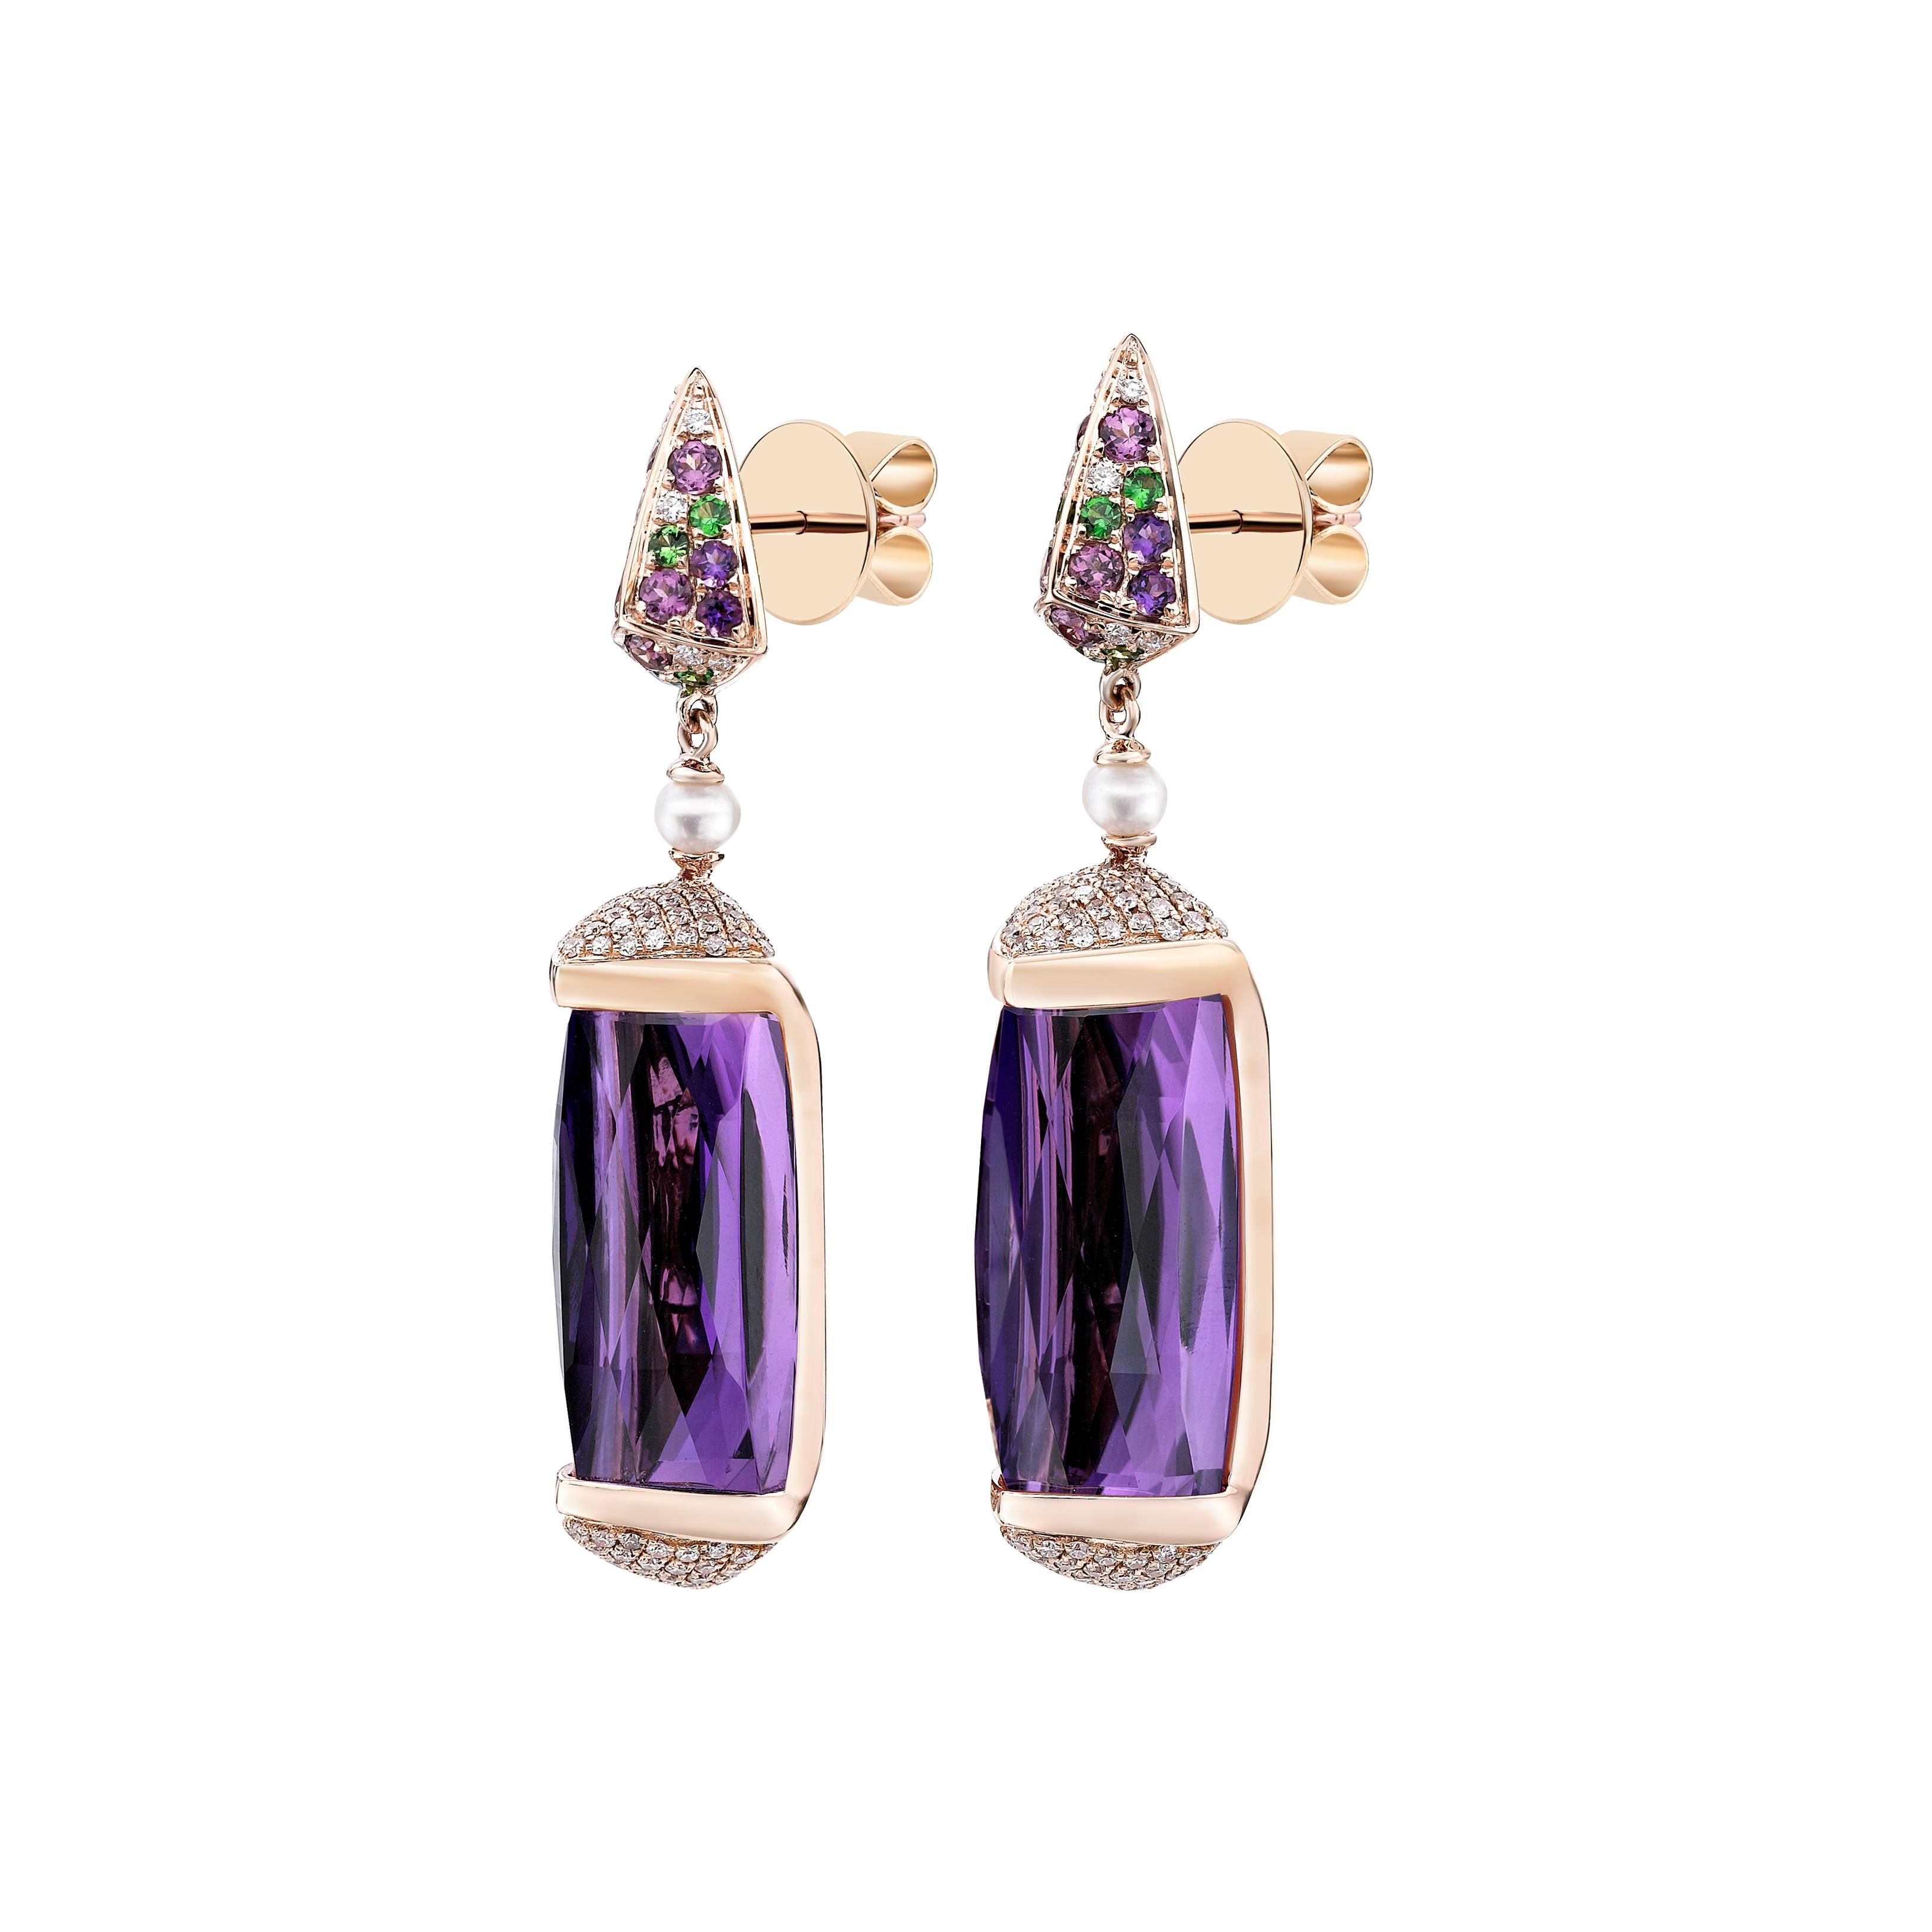 46 Carat Amethyst and Diamond Ring and Earring Set in 18 Karat Rose Gold For Sale 3